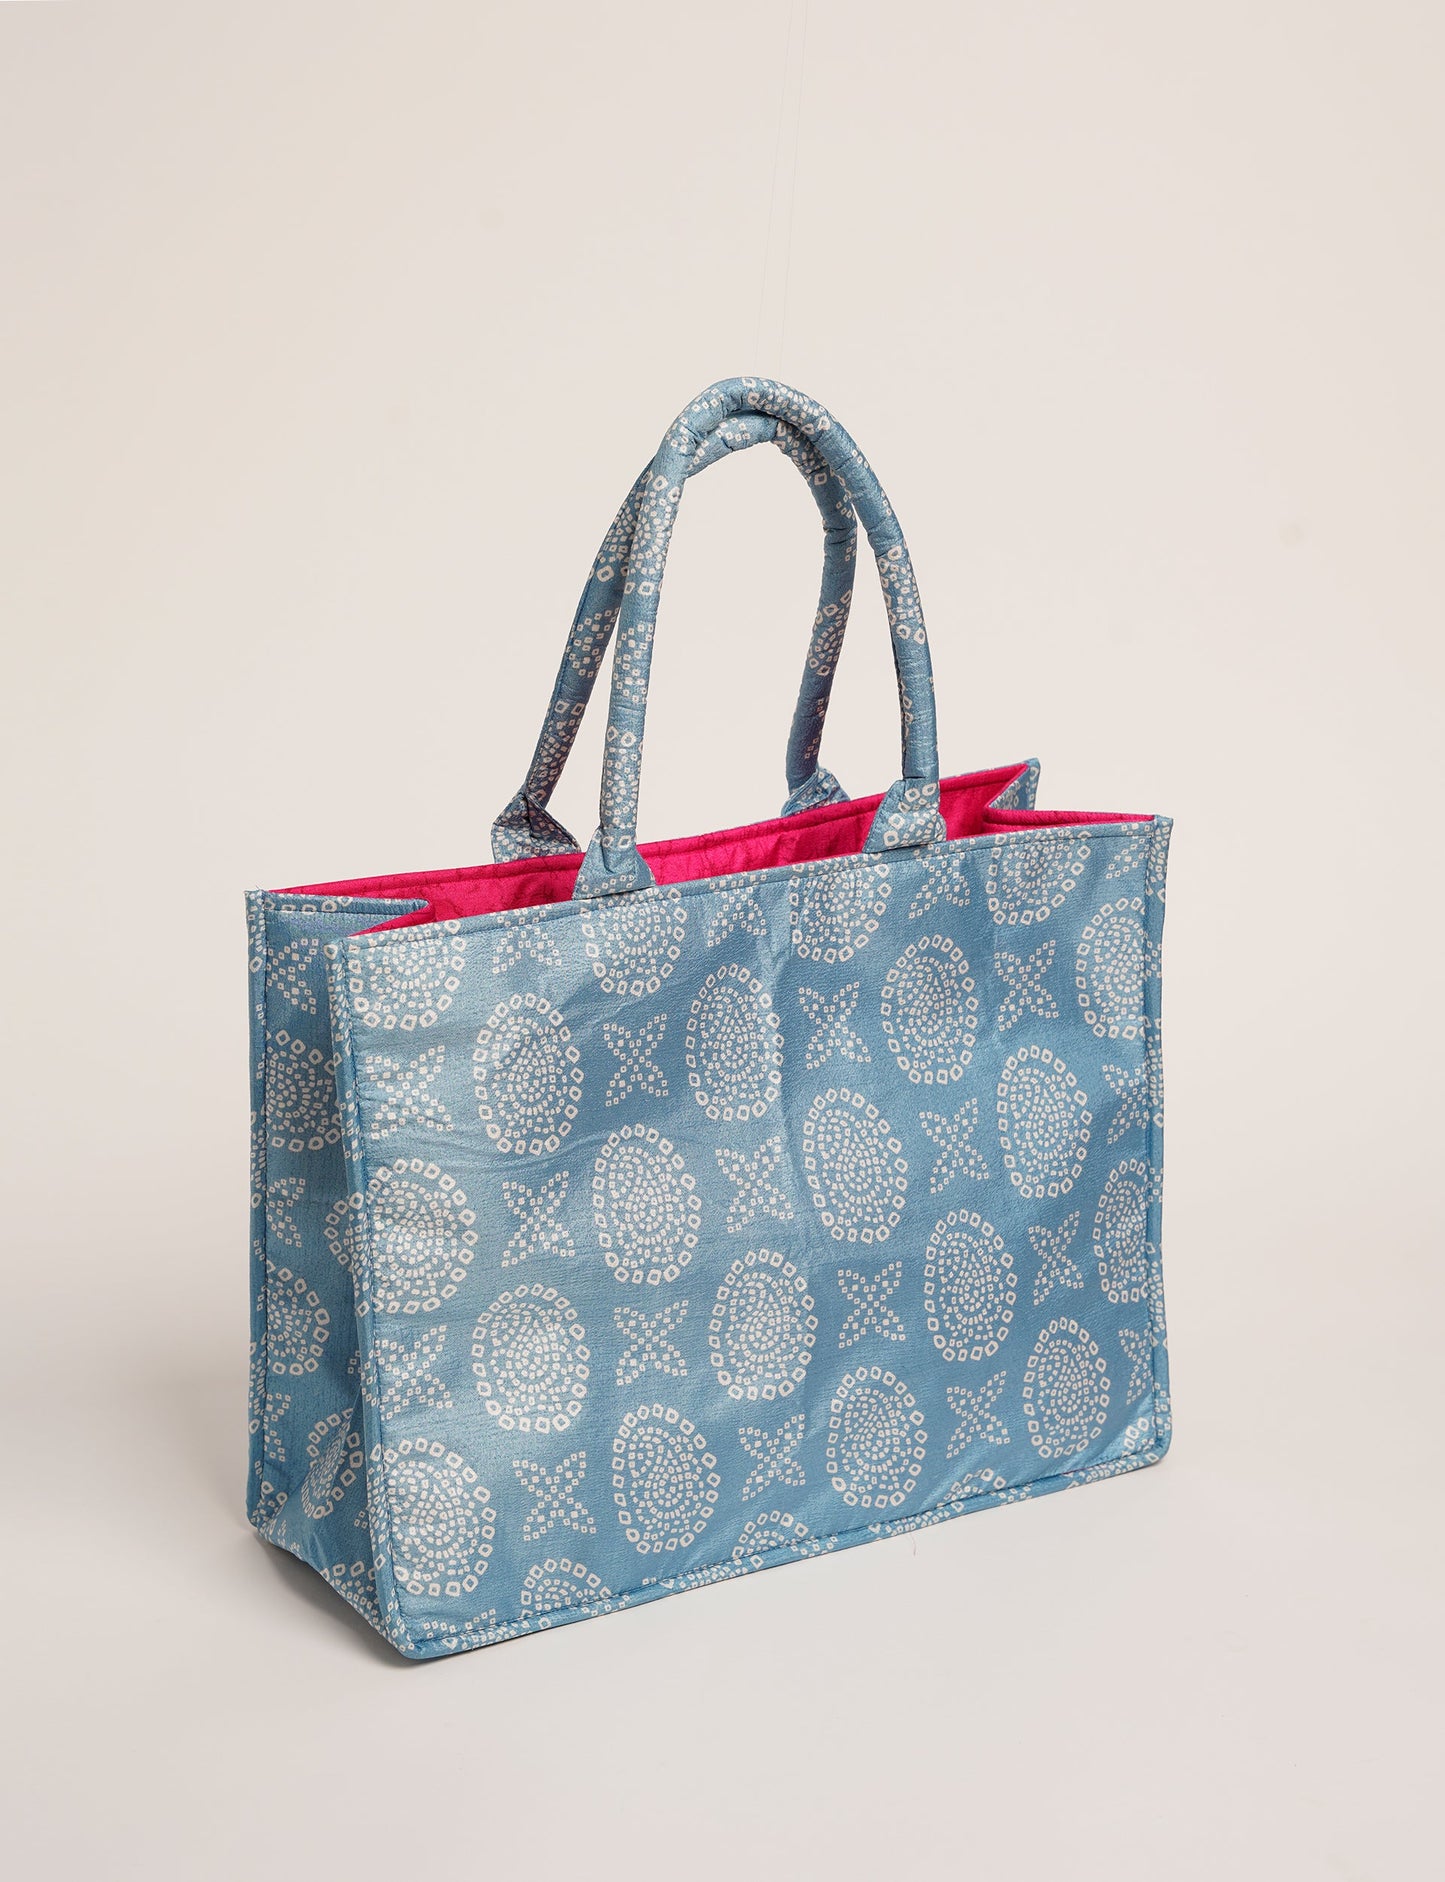 Elevate your eco-friendly style with our Work Tote Bag, a semi-structured, sustainable masterpiece. Soft padded handles, contrast lining, and an inside zipper pocket make it both stylish and functional. Perfect for carrying your laptop and more, this tote stands tall as a symbol of conscious fashion.